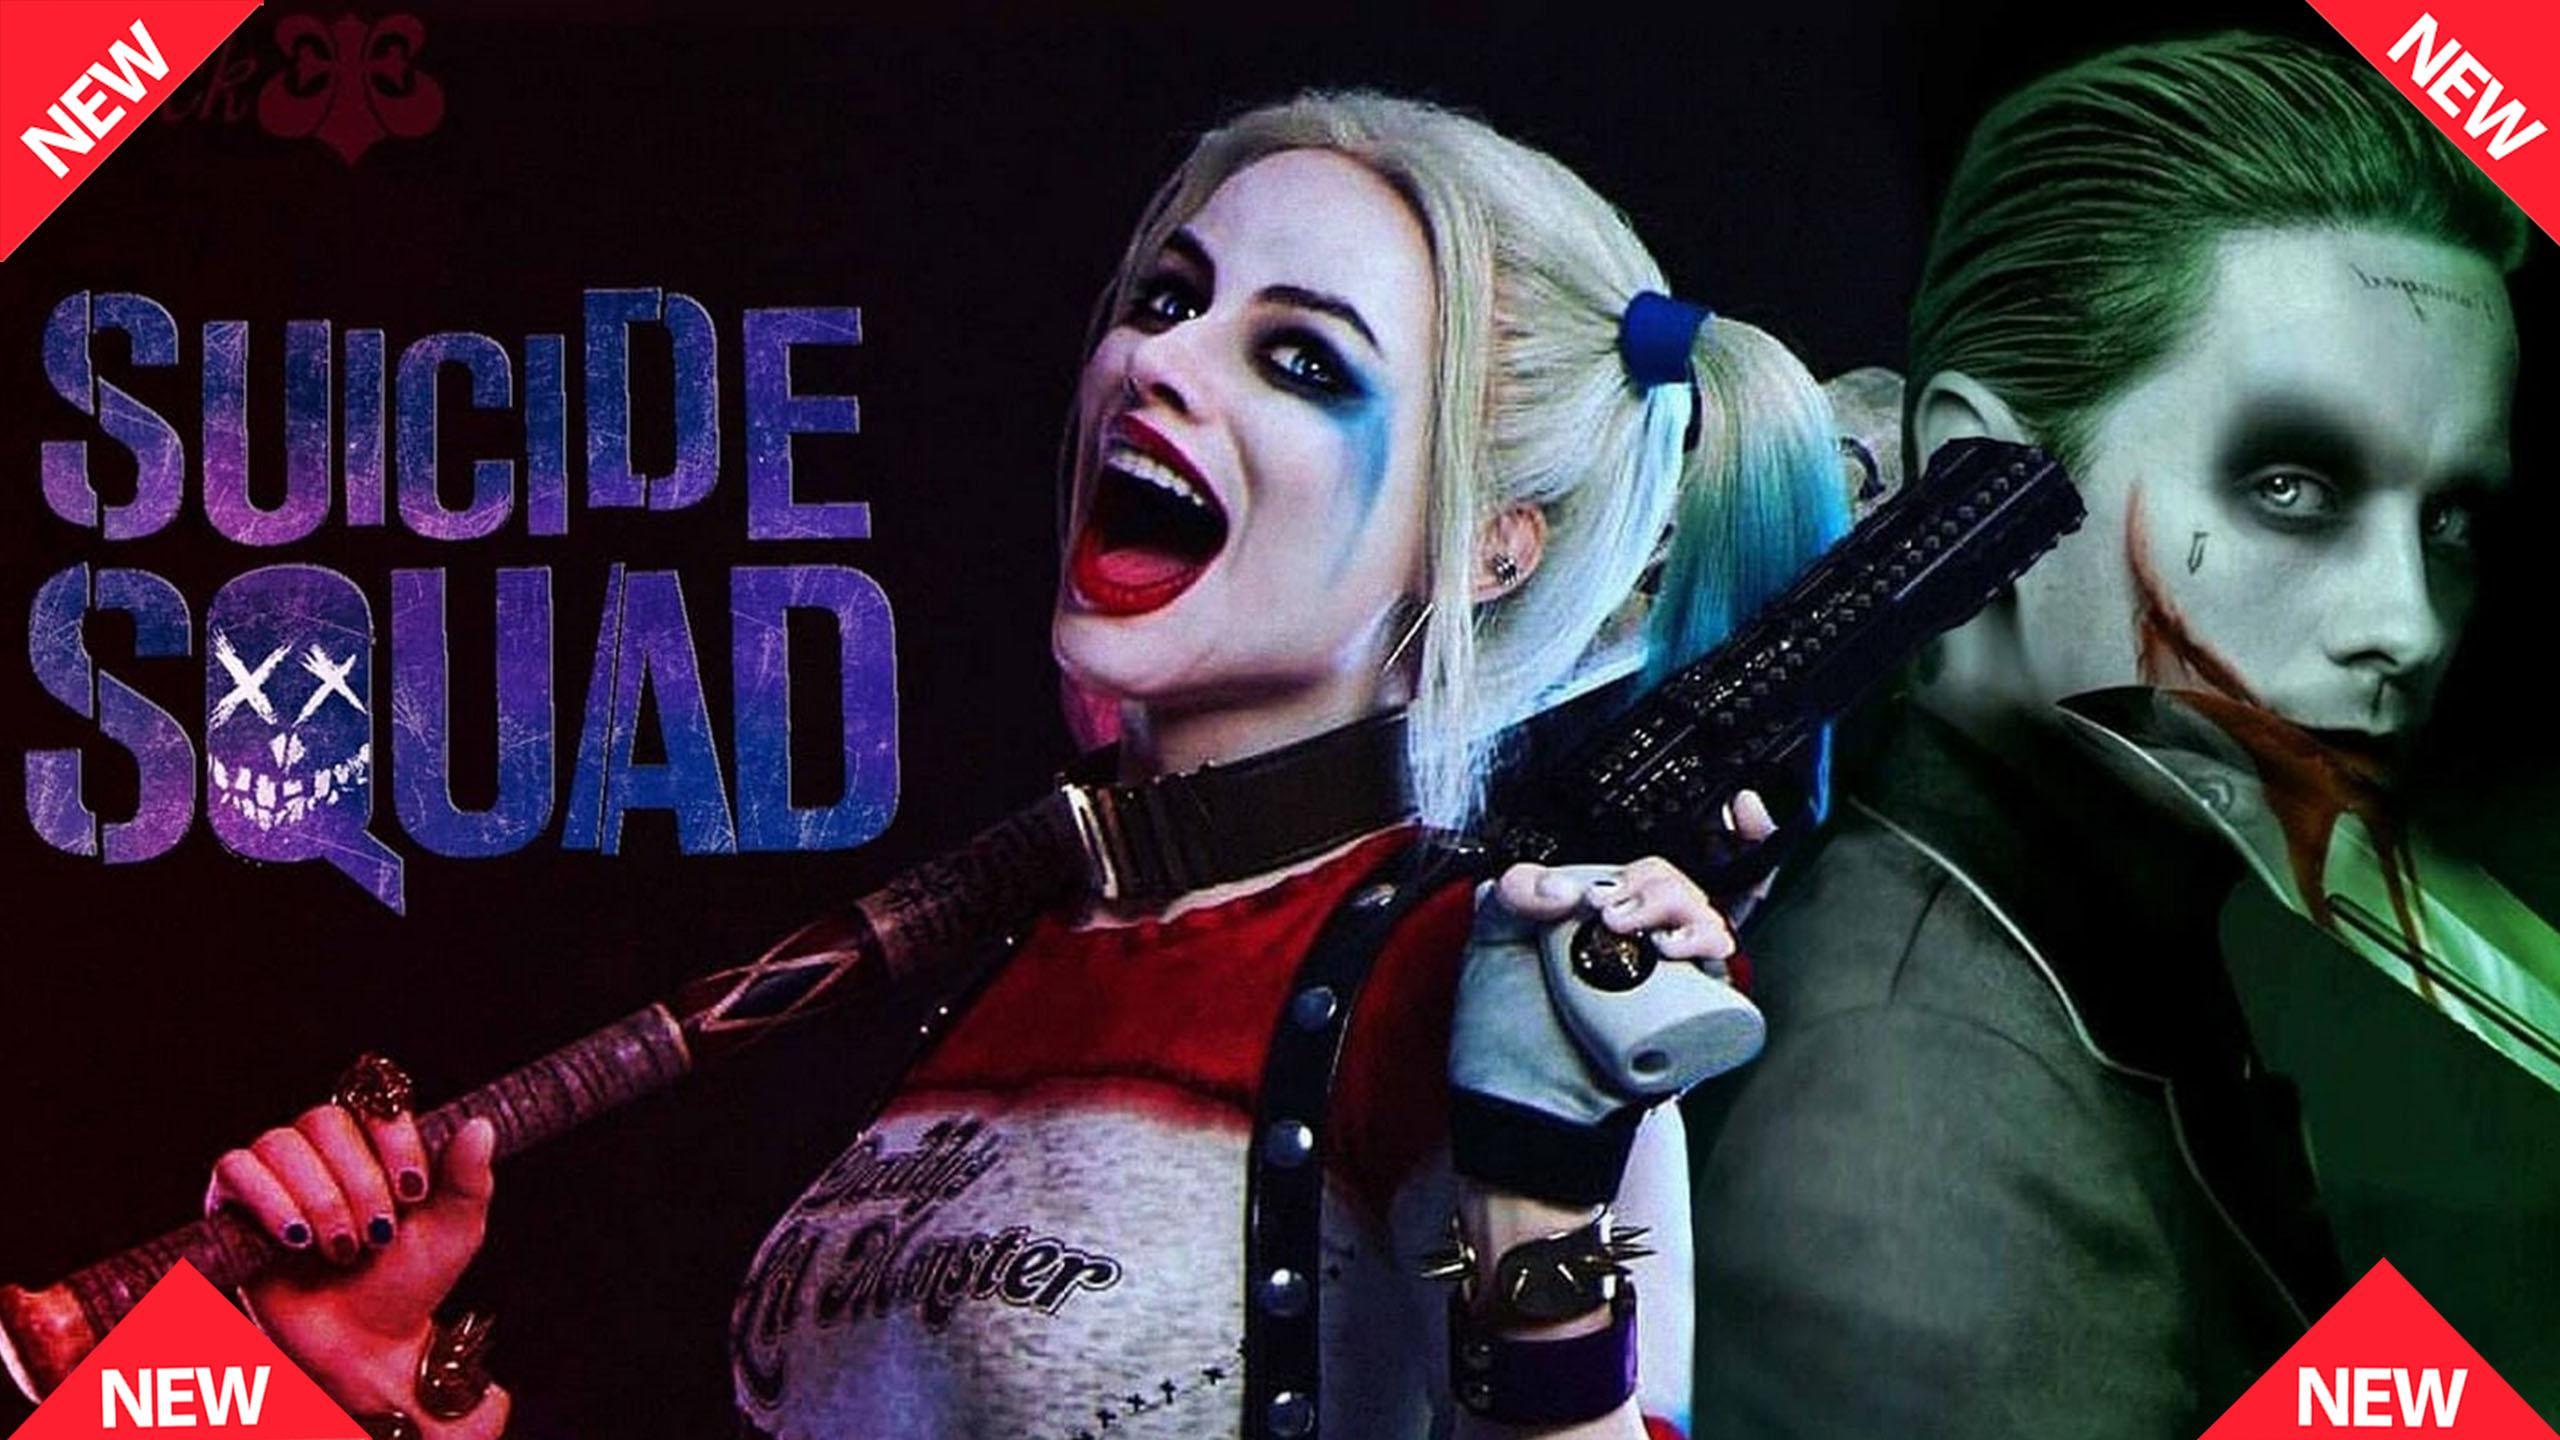 Harley Quinn And Joker Wallpaper HD For Android Apk